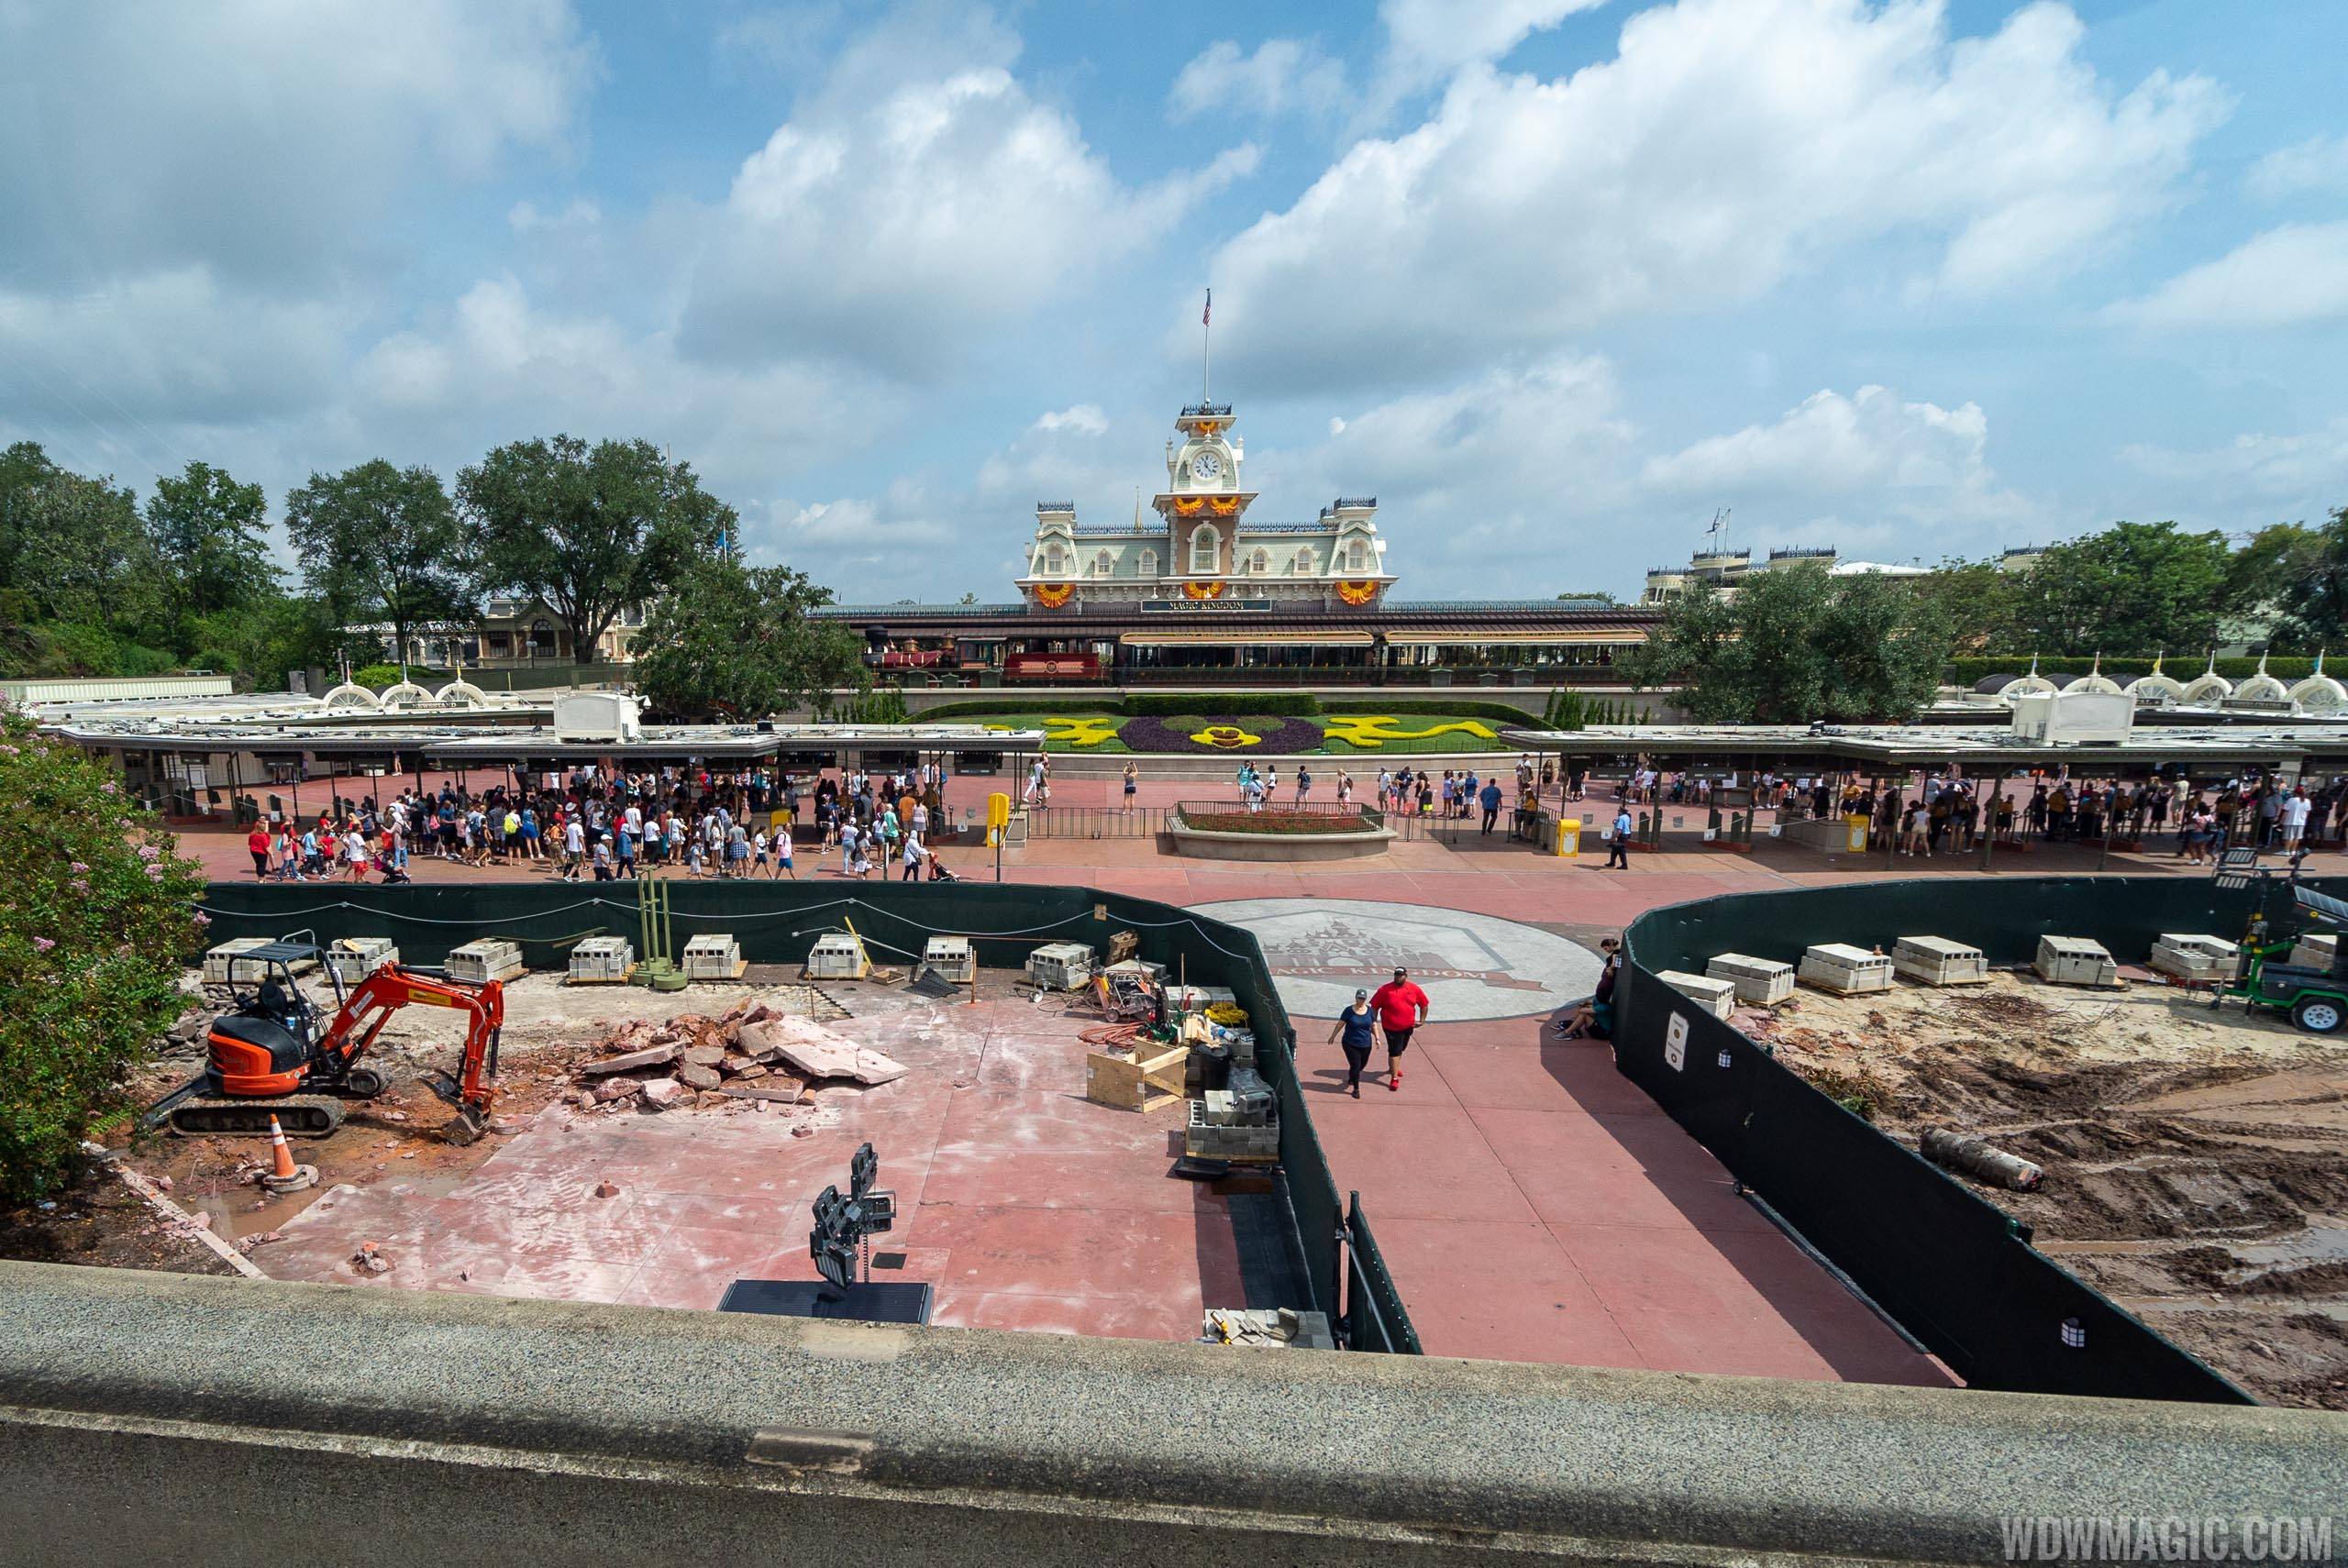 PHOTOS - Construction update from the main entrance of the Magic Kingdom